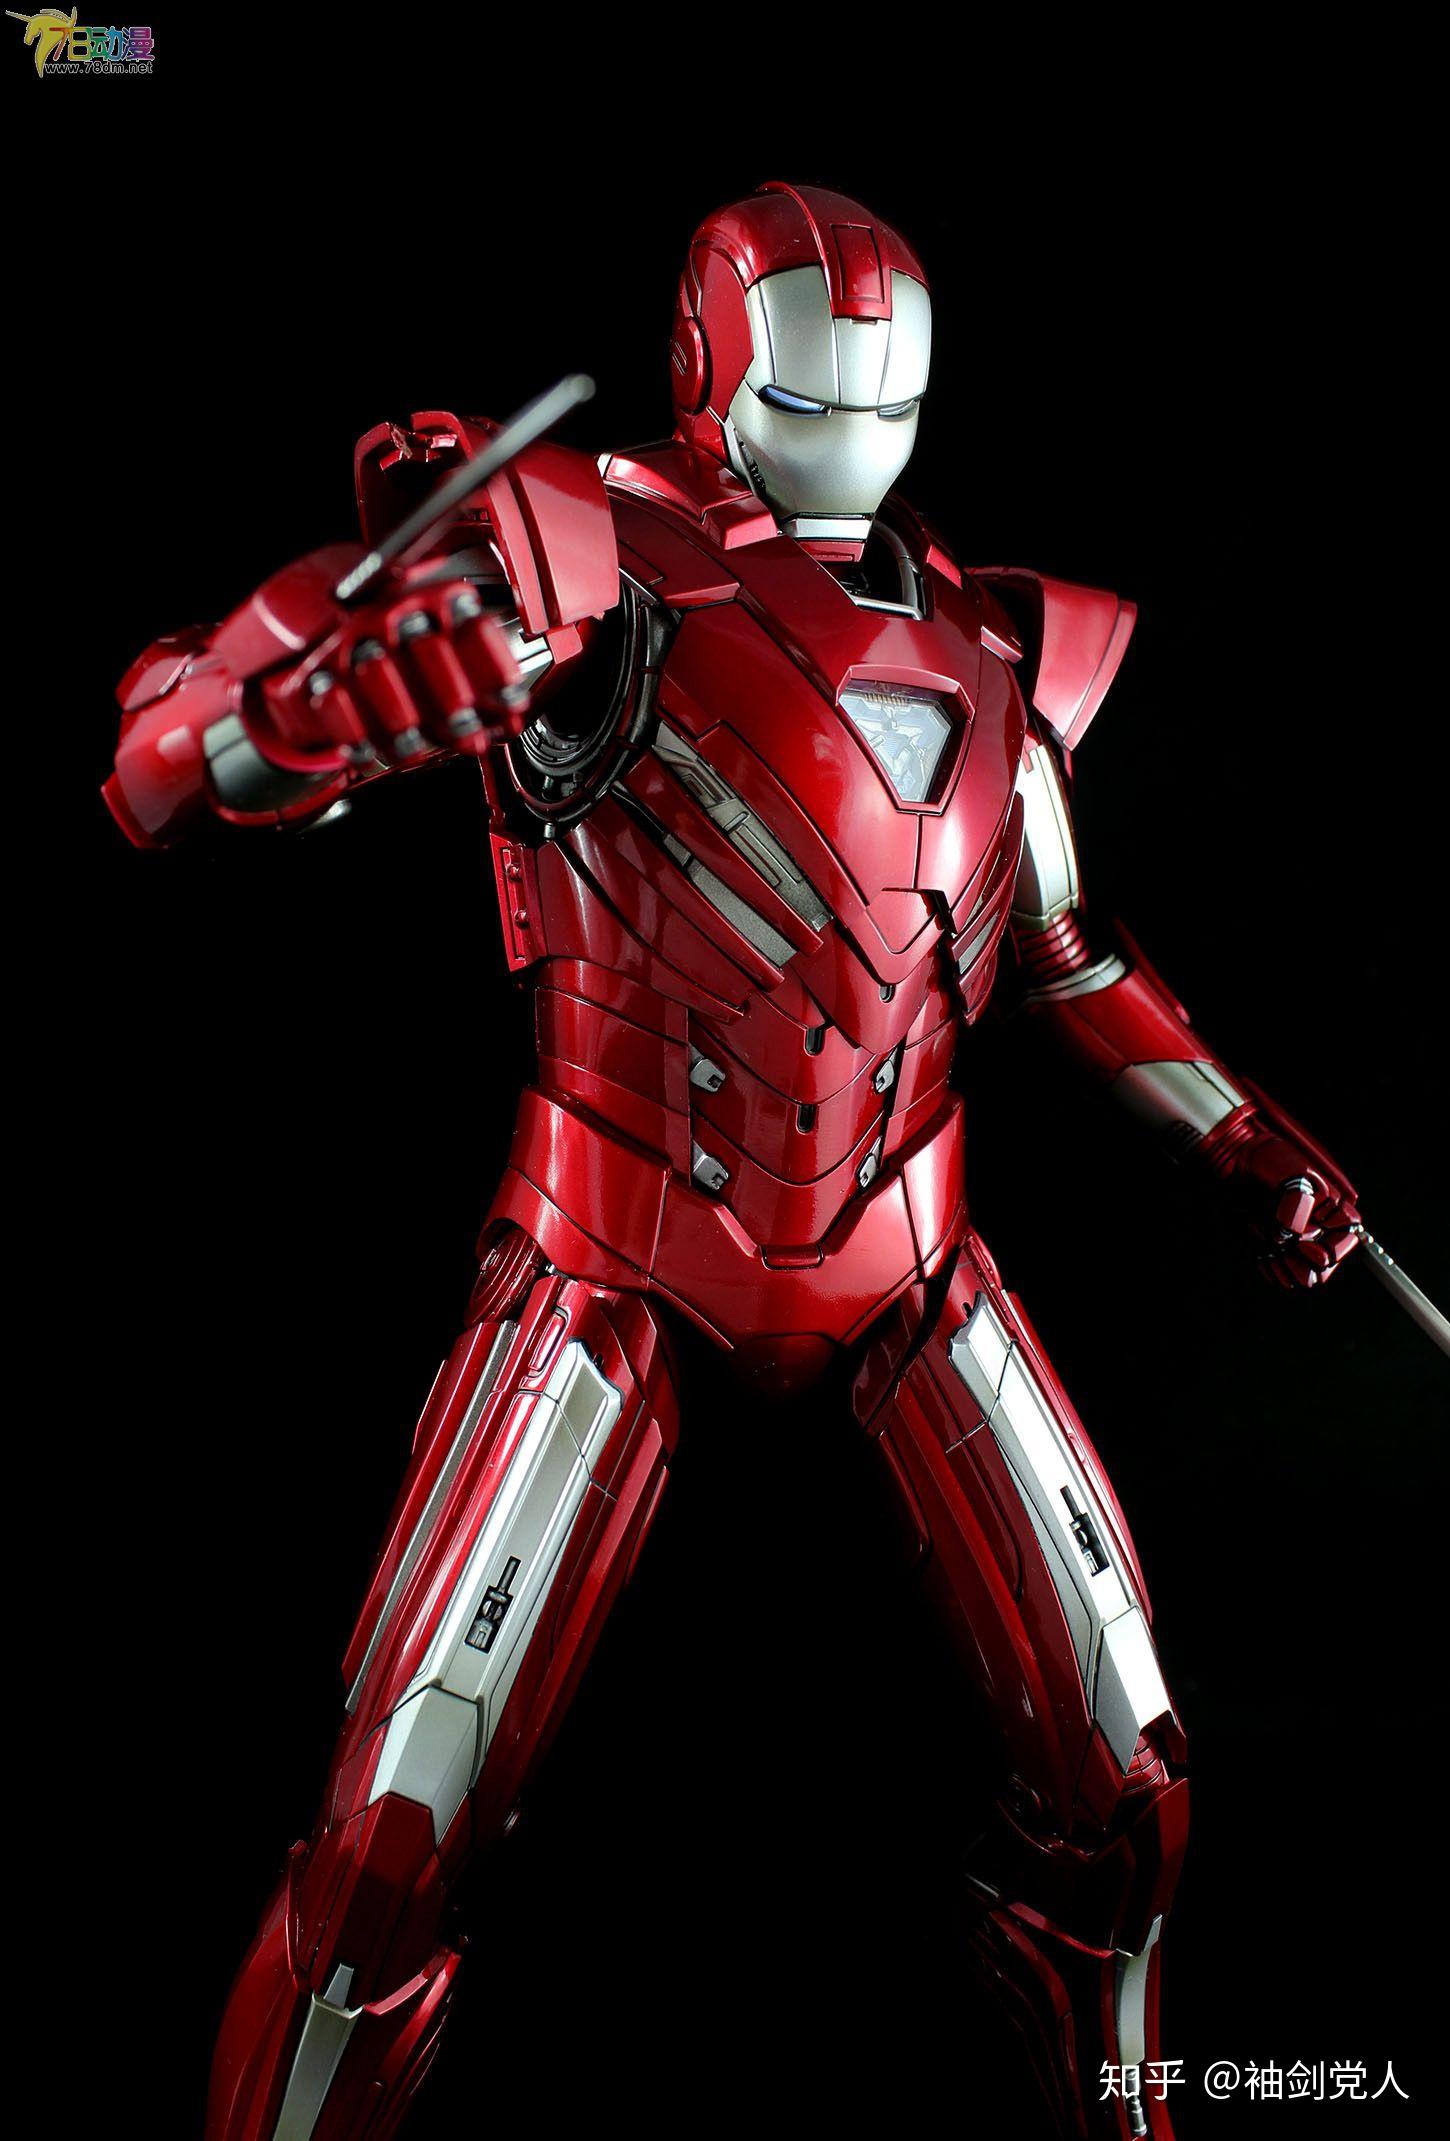 Every Iron Man Suit From the MCU in One Awesome Image – iNerd